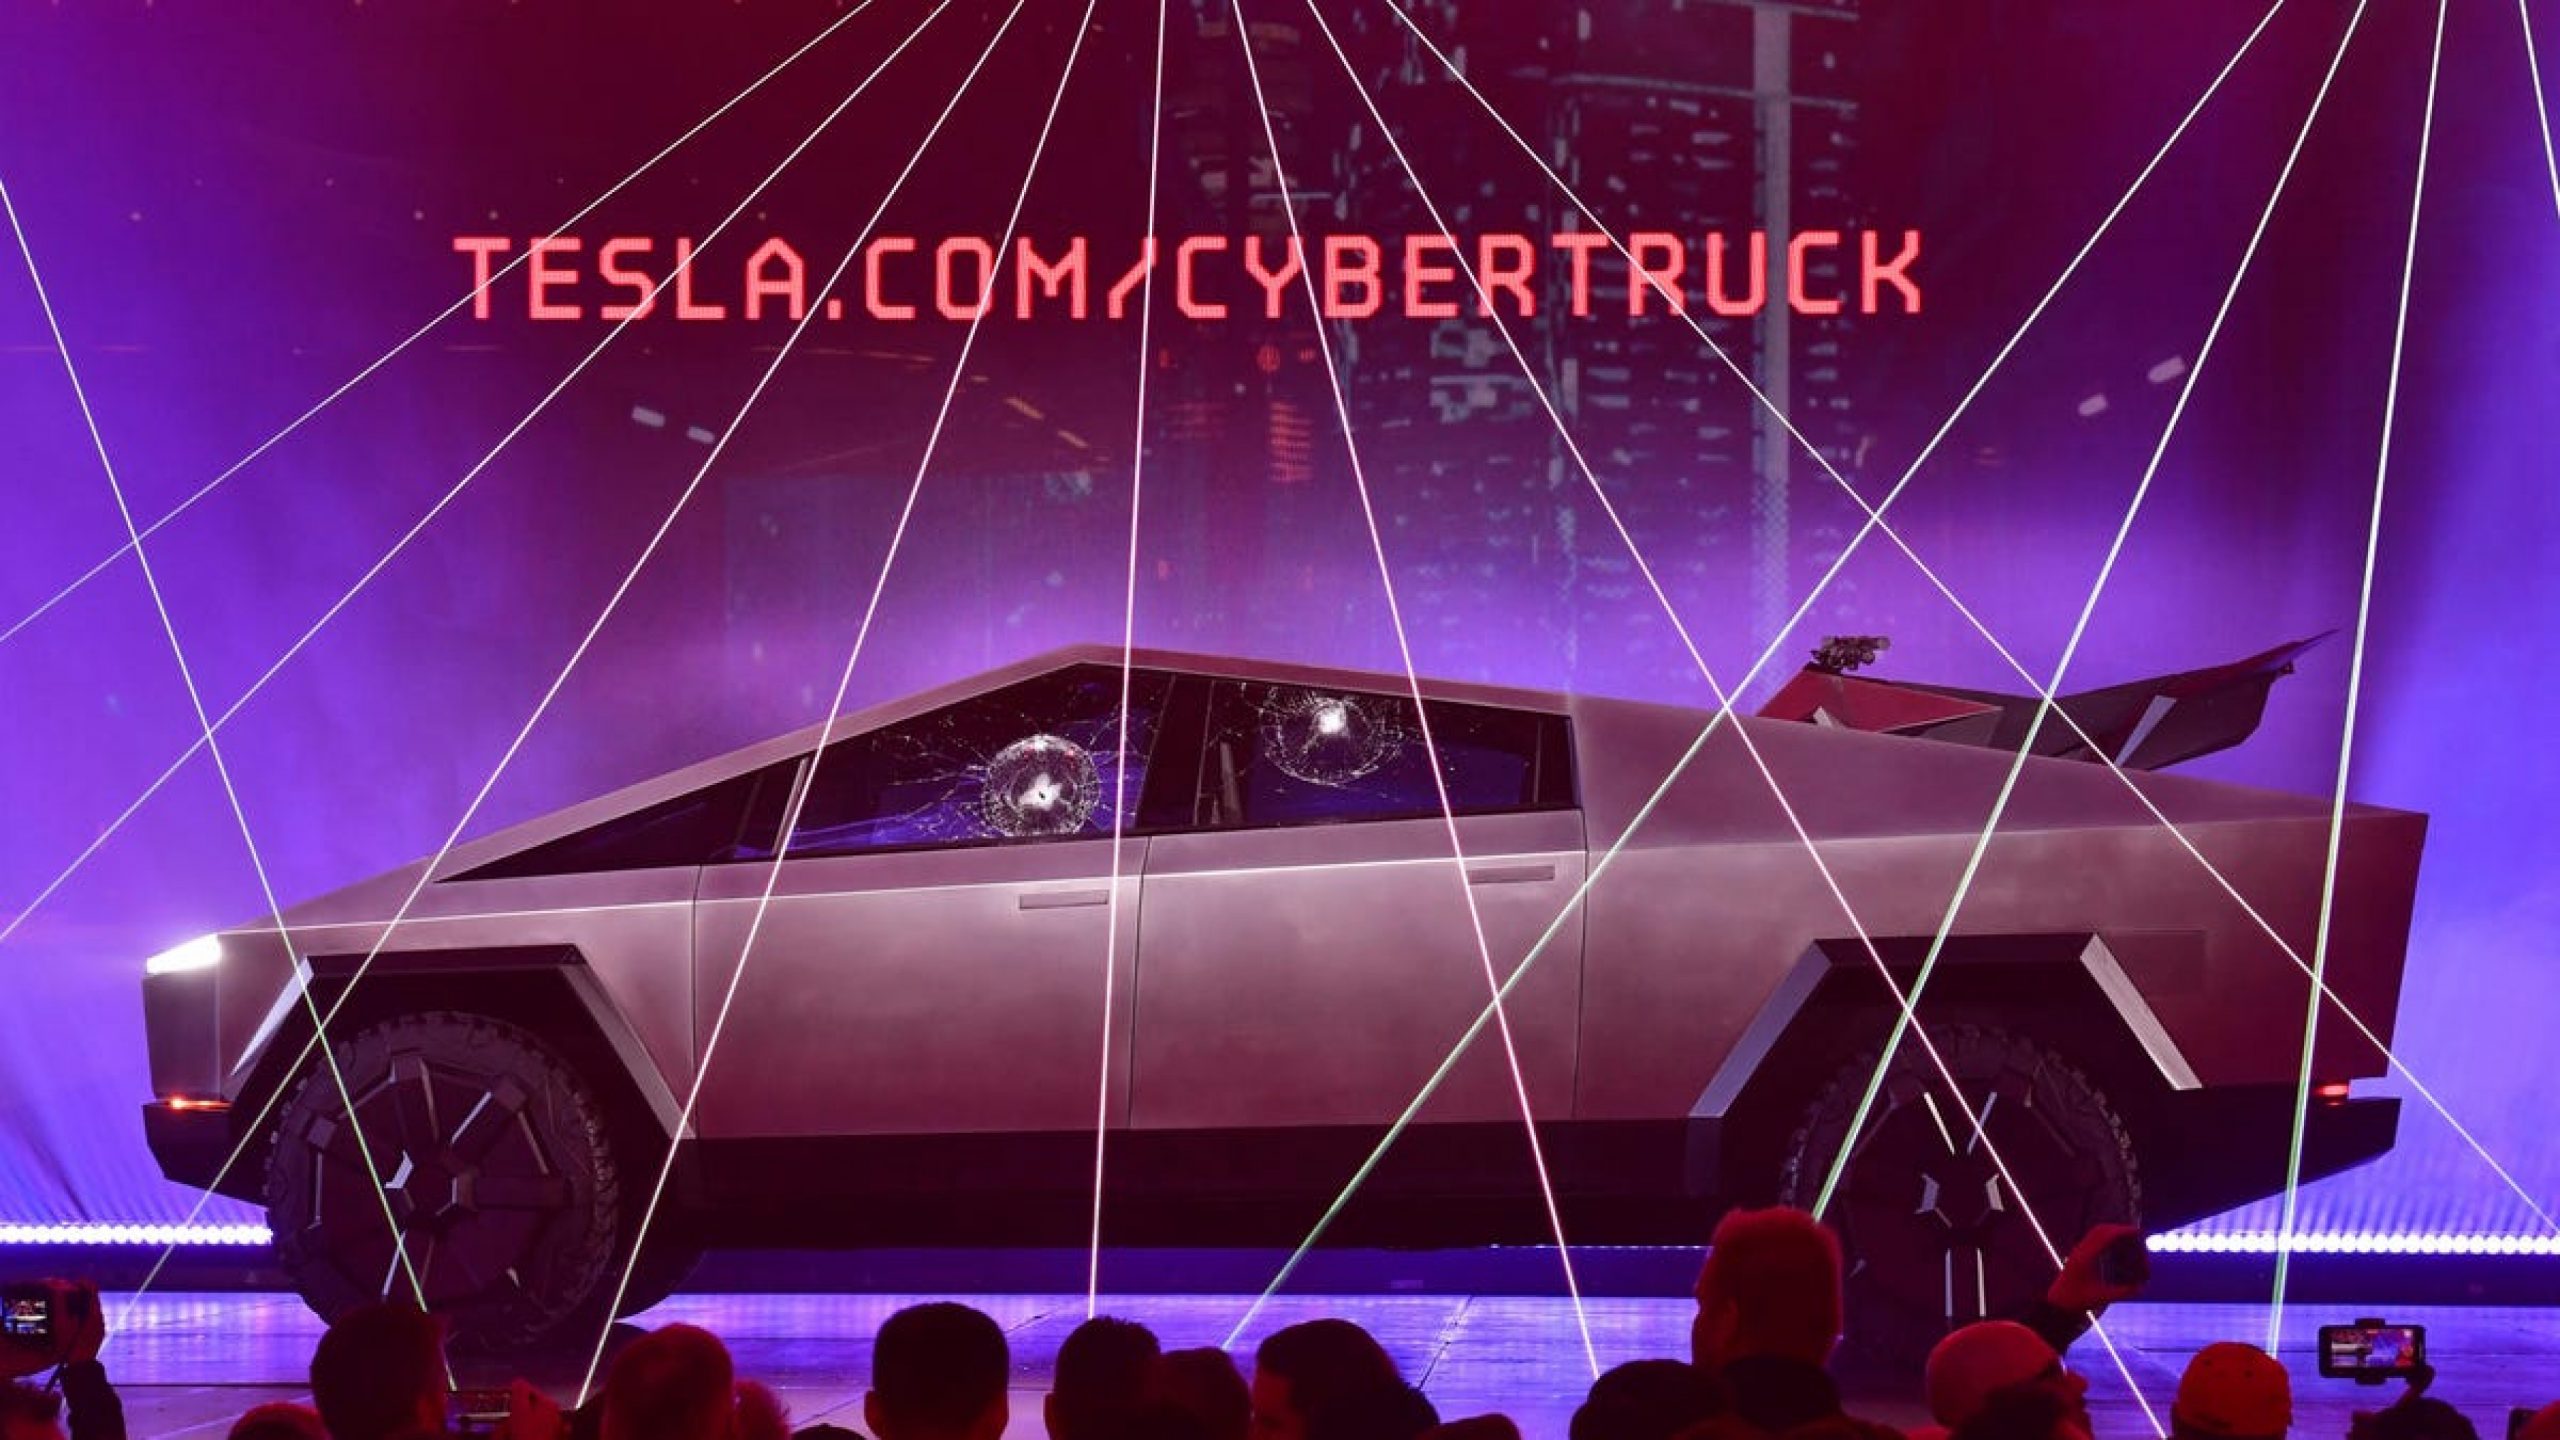 An Unsurprising But Sad Update for Tesla Cybertruck Fans: Production Has Been Pushed to 2022